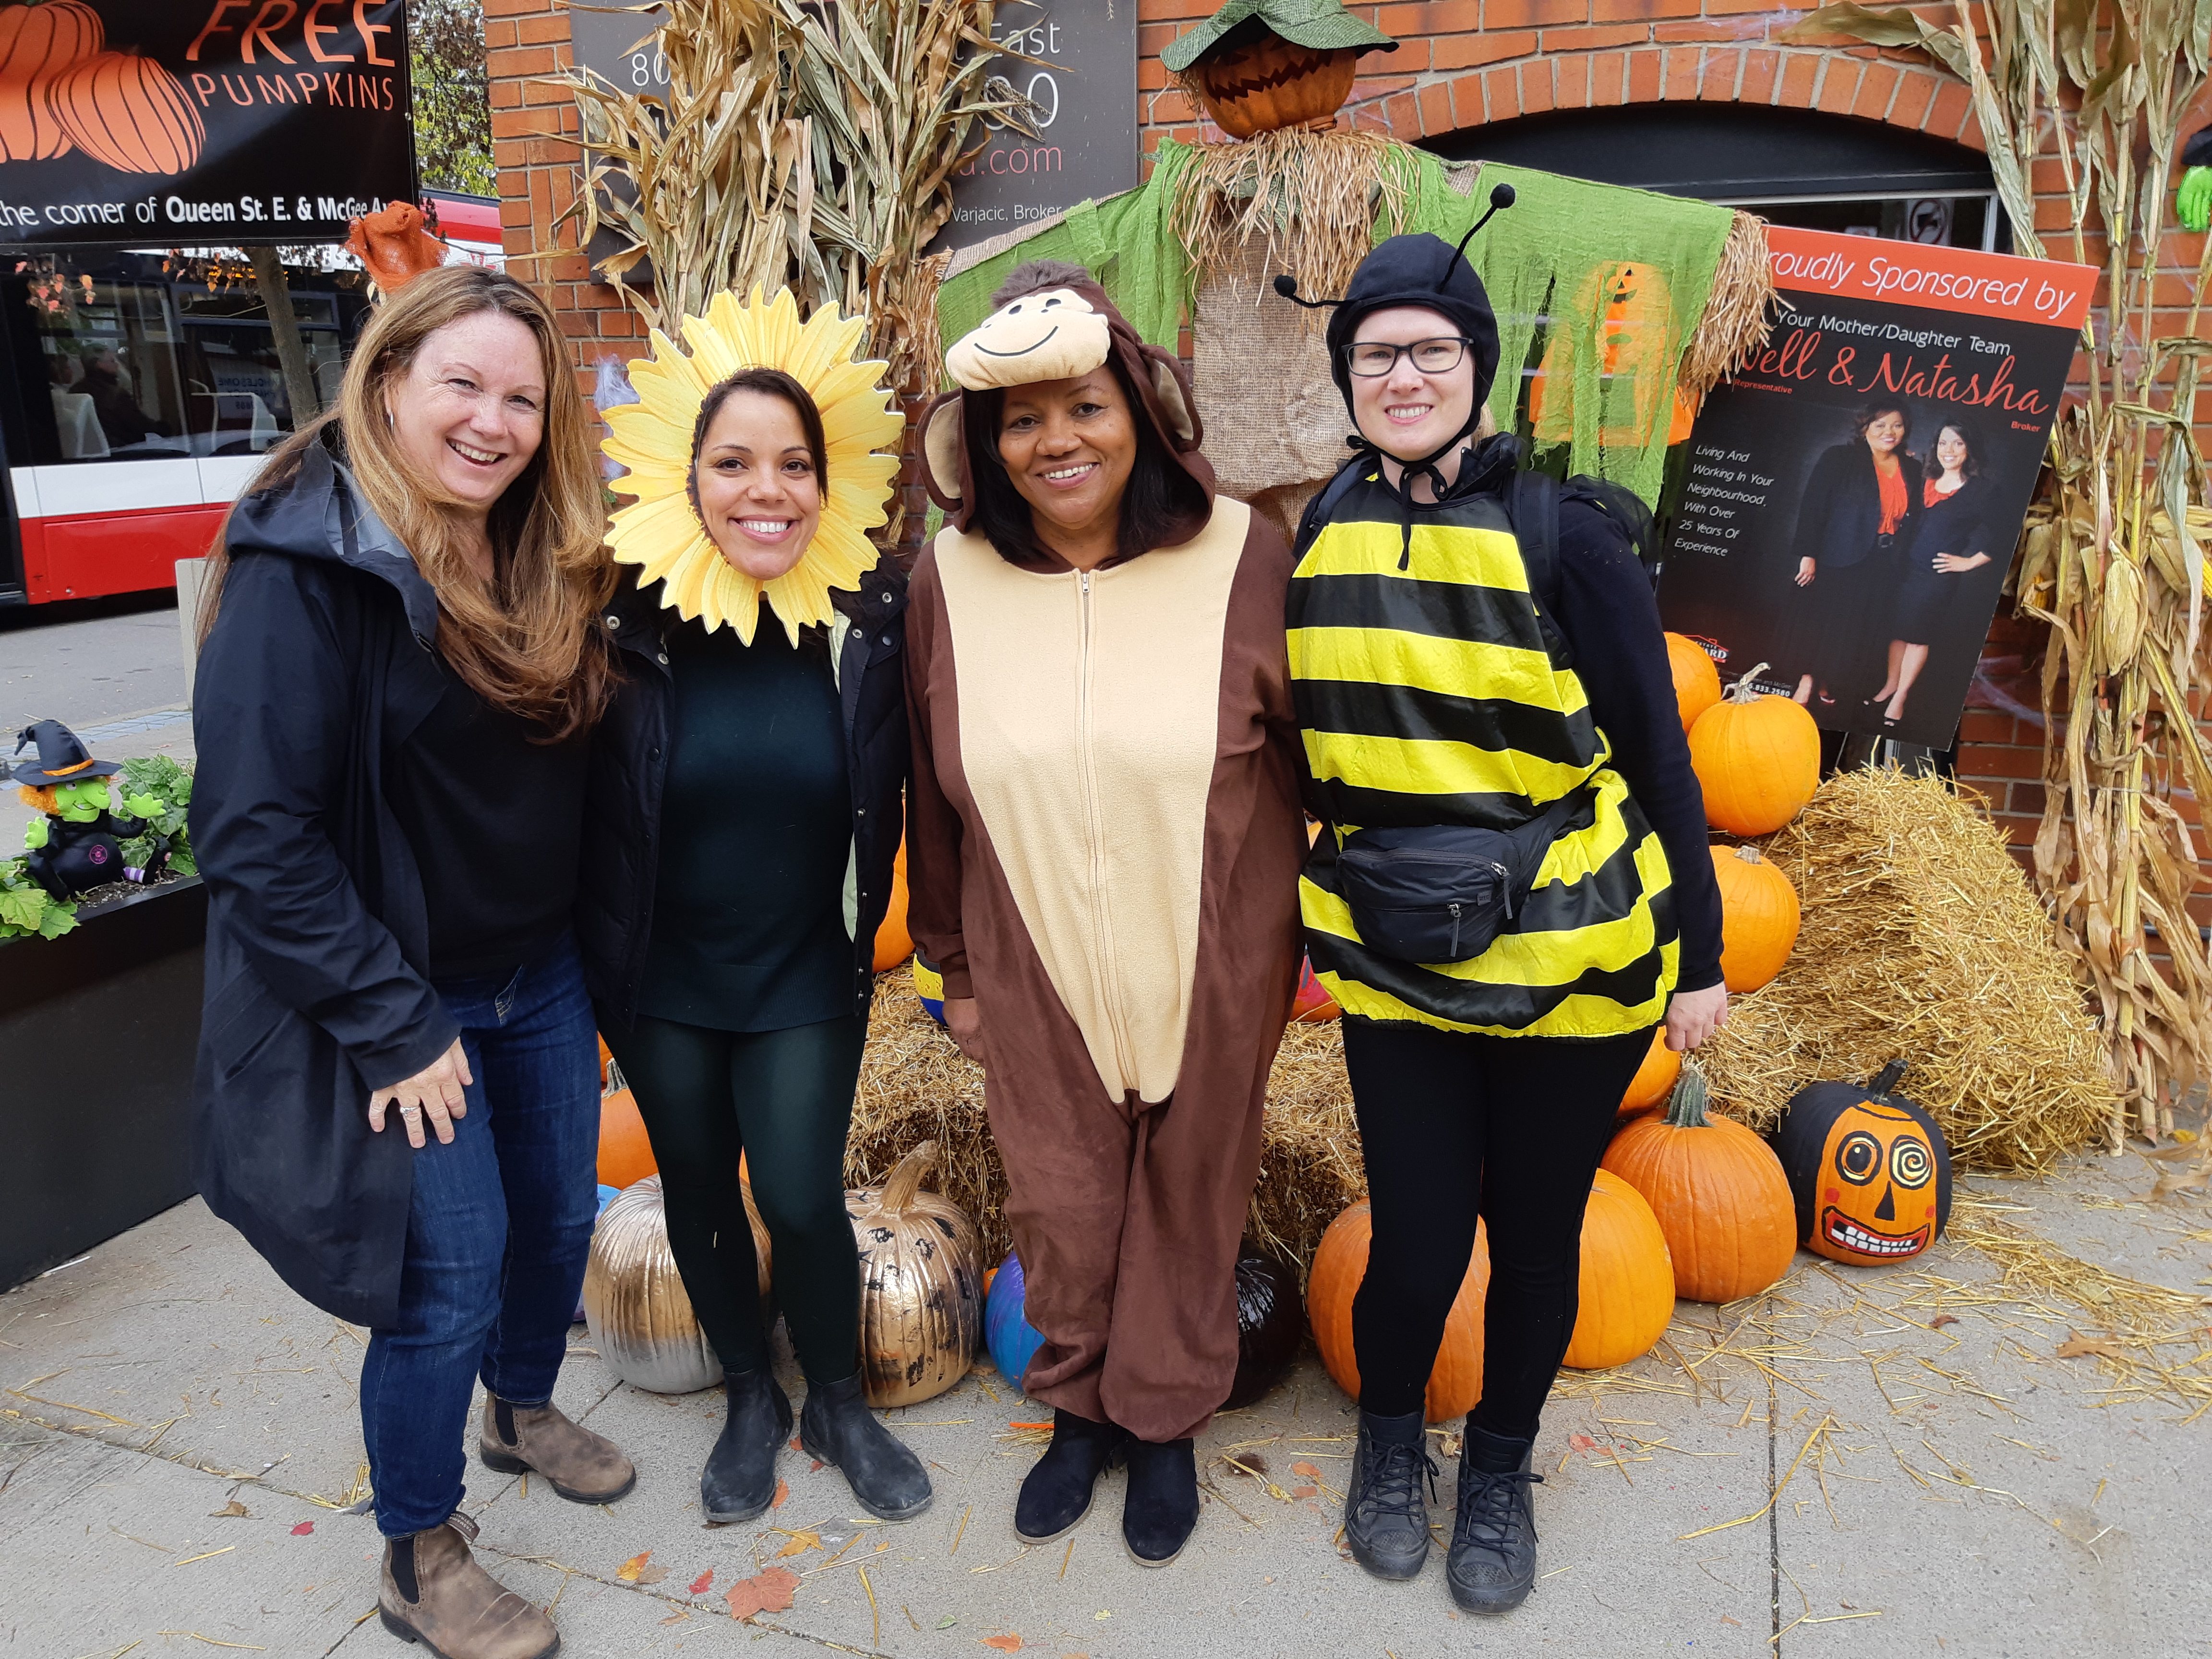 Riverside Halloween organizers Nell and Natasha, Jimmie Simpson Rec Centre and Riverside BIA, 2019